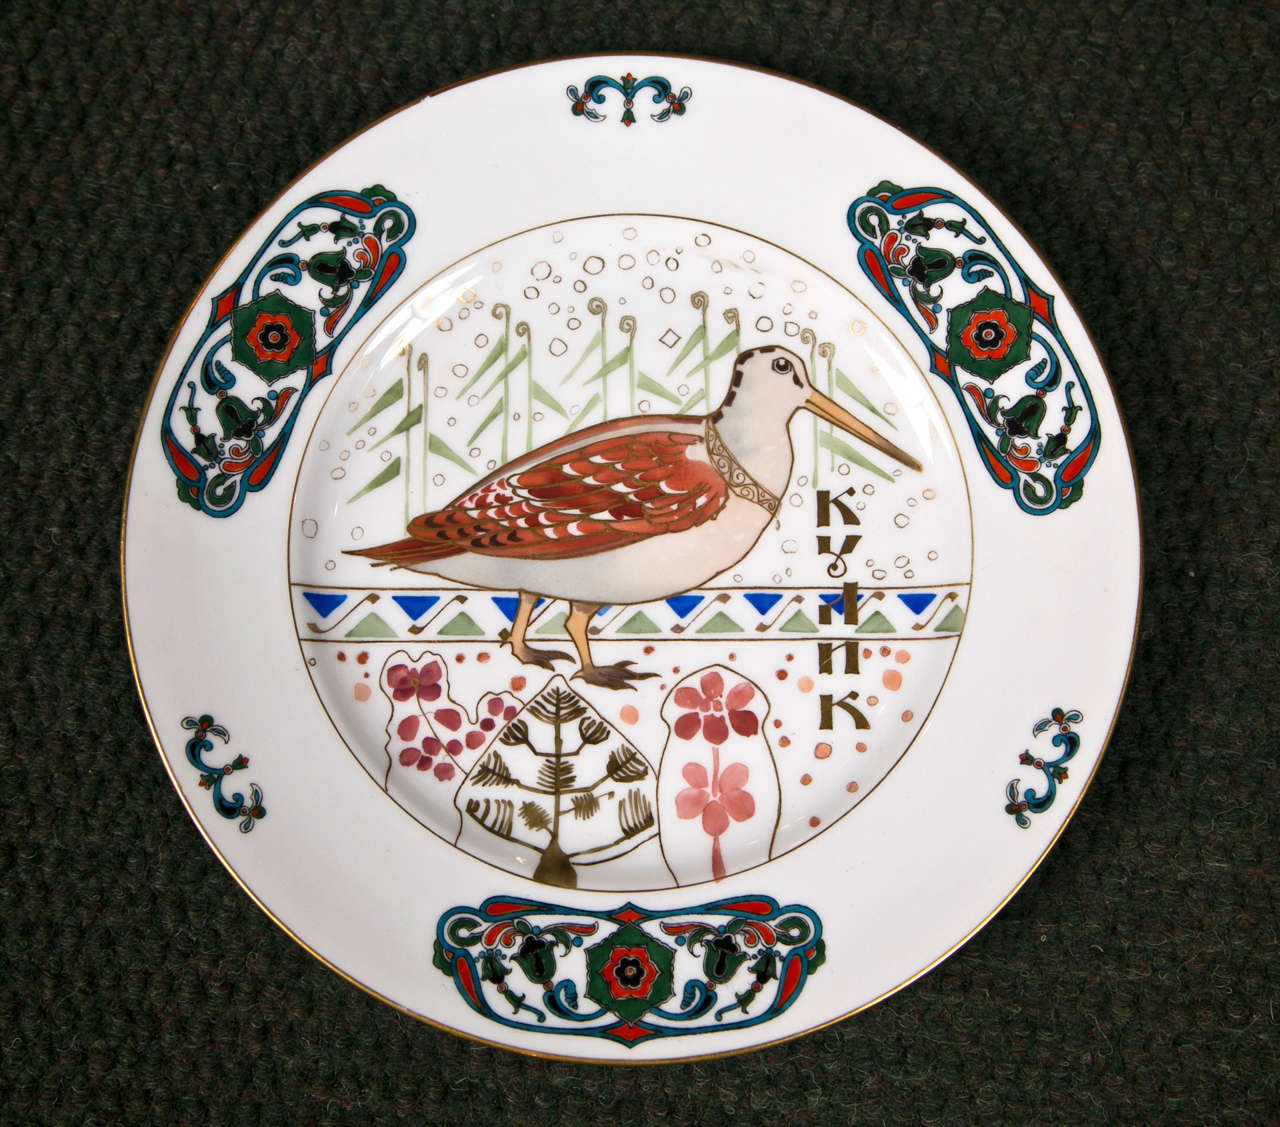 Two Russian porcelain ornithological plates by the Kornilov Factory in St. Petersburg, one with a painting of a waterhen and the other with a moorcock, after designs by I. Gal'nbek.